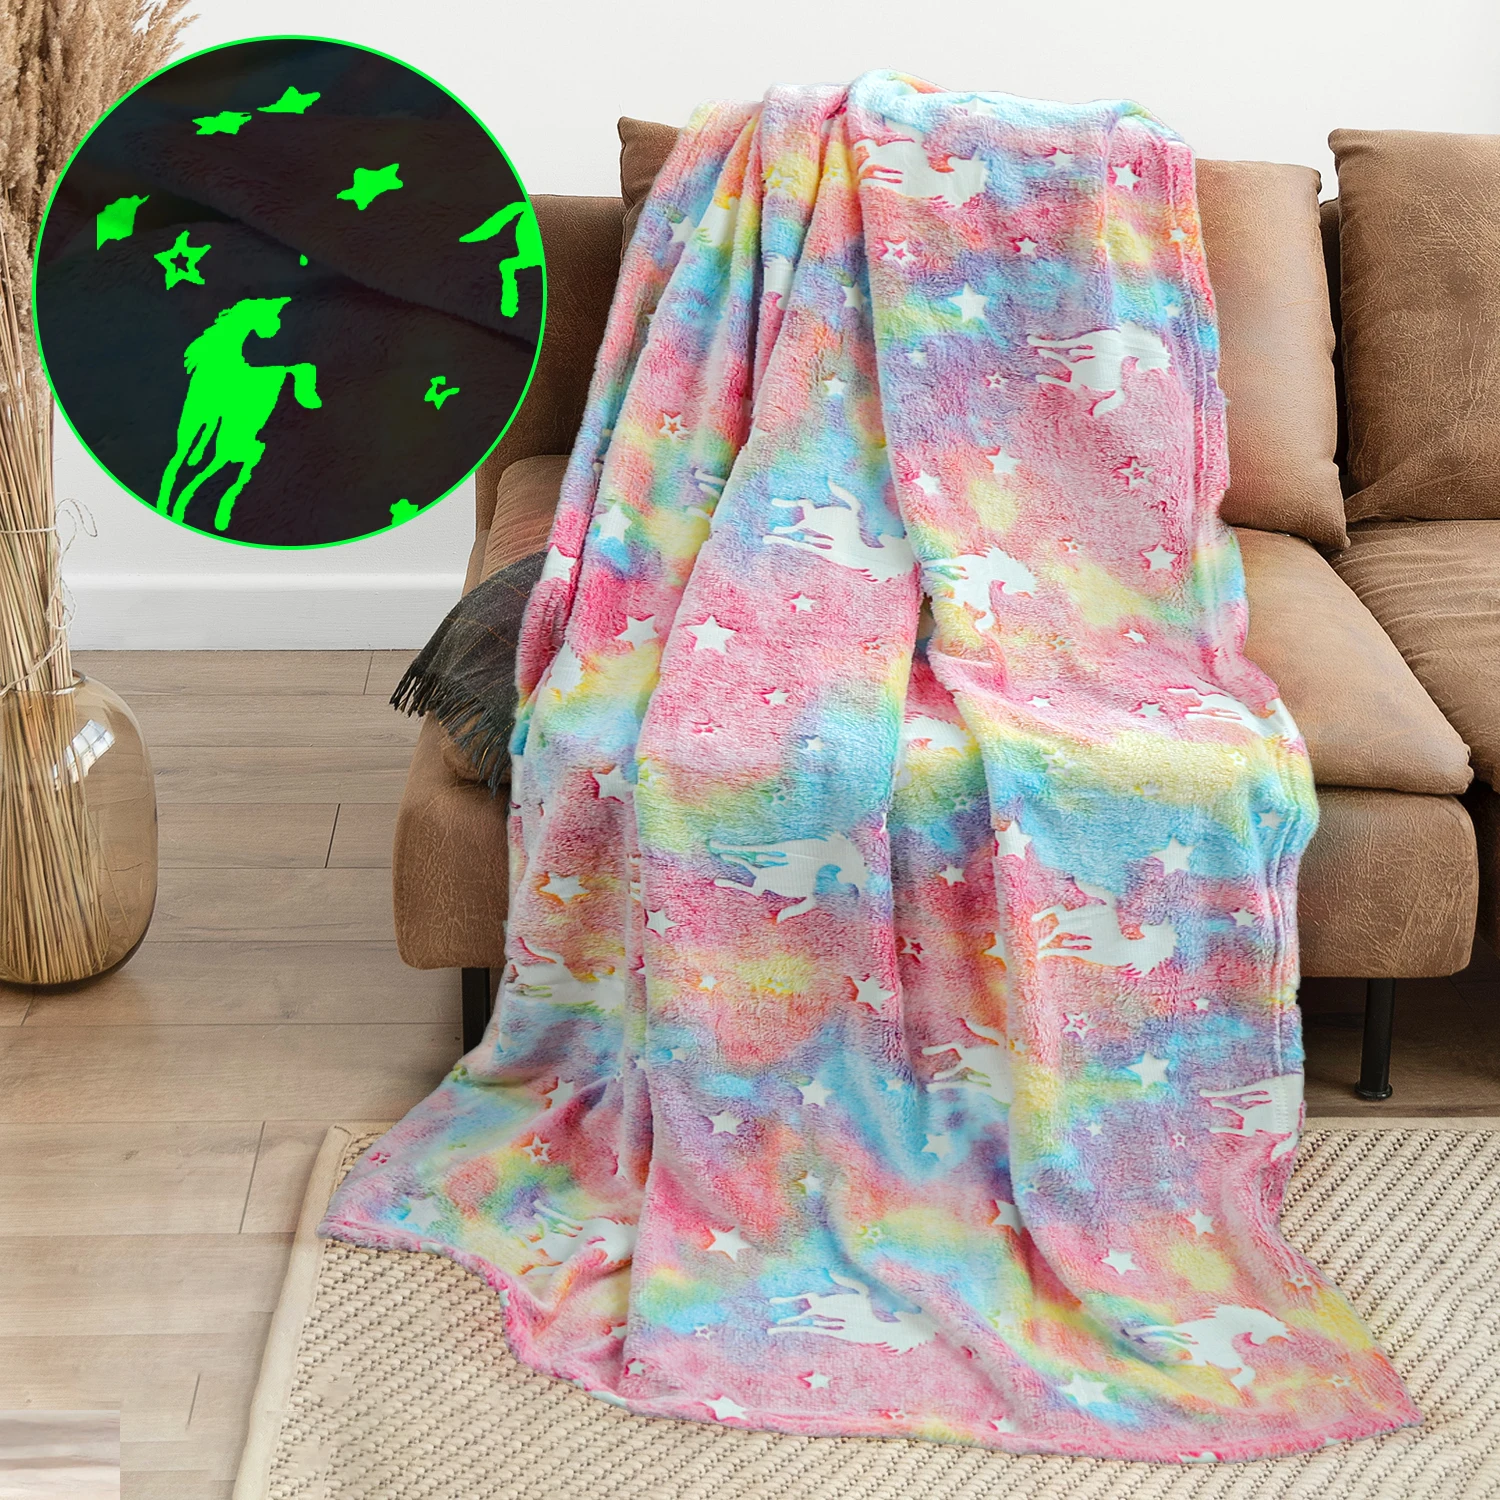 

Throw Blanket Glow in The Dark Couch Blanket for Bed Sofa Cute Dinosaur Luminous Winter Warm Cozy Blanket Kids Christmas Gift